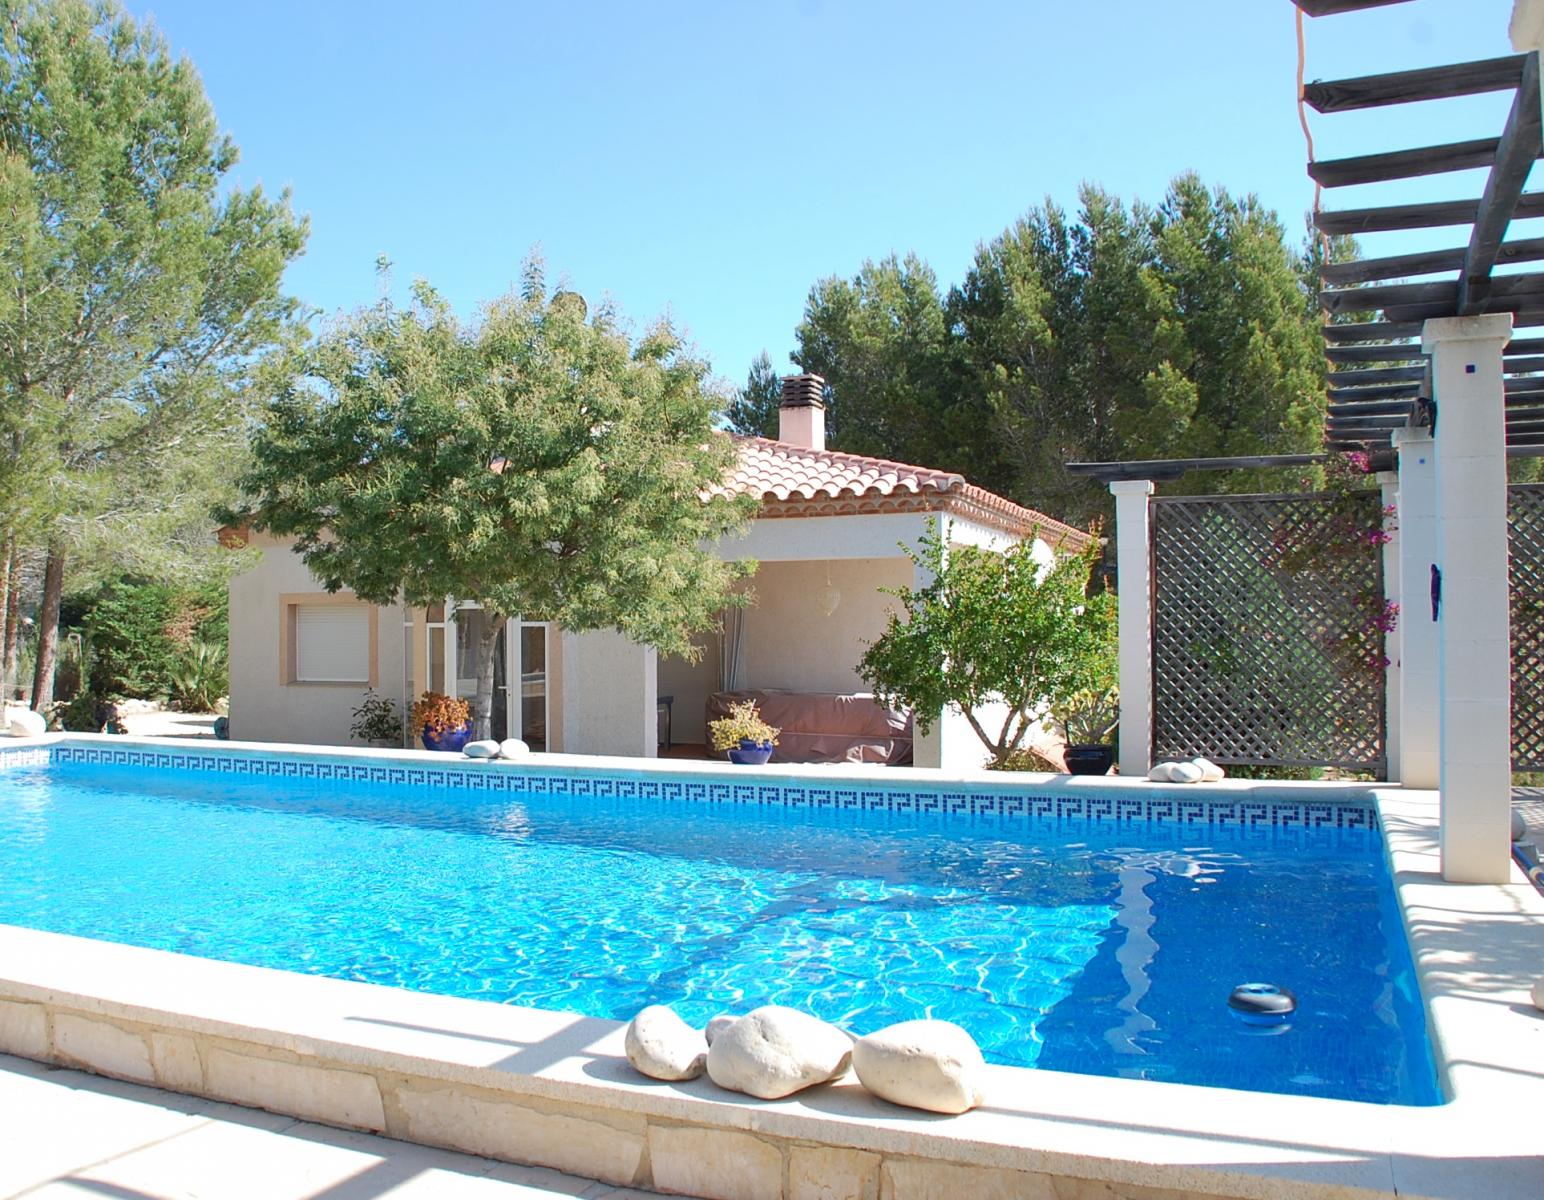 Beautiful villa with private pool in the middle of nature in St Jordi